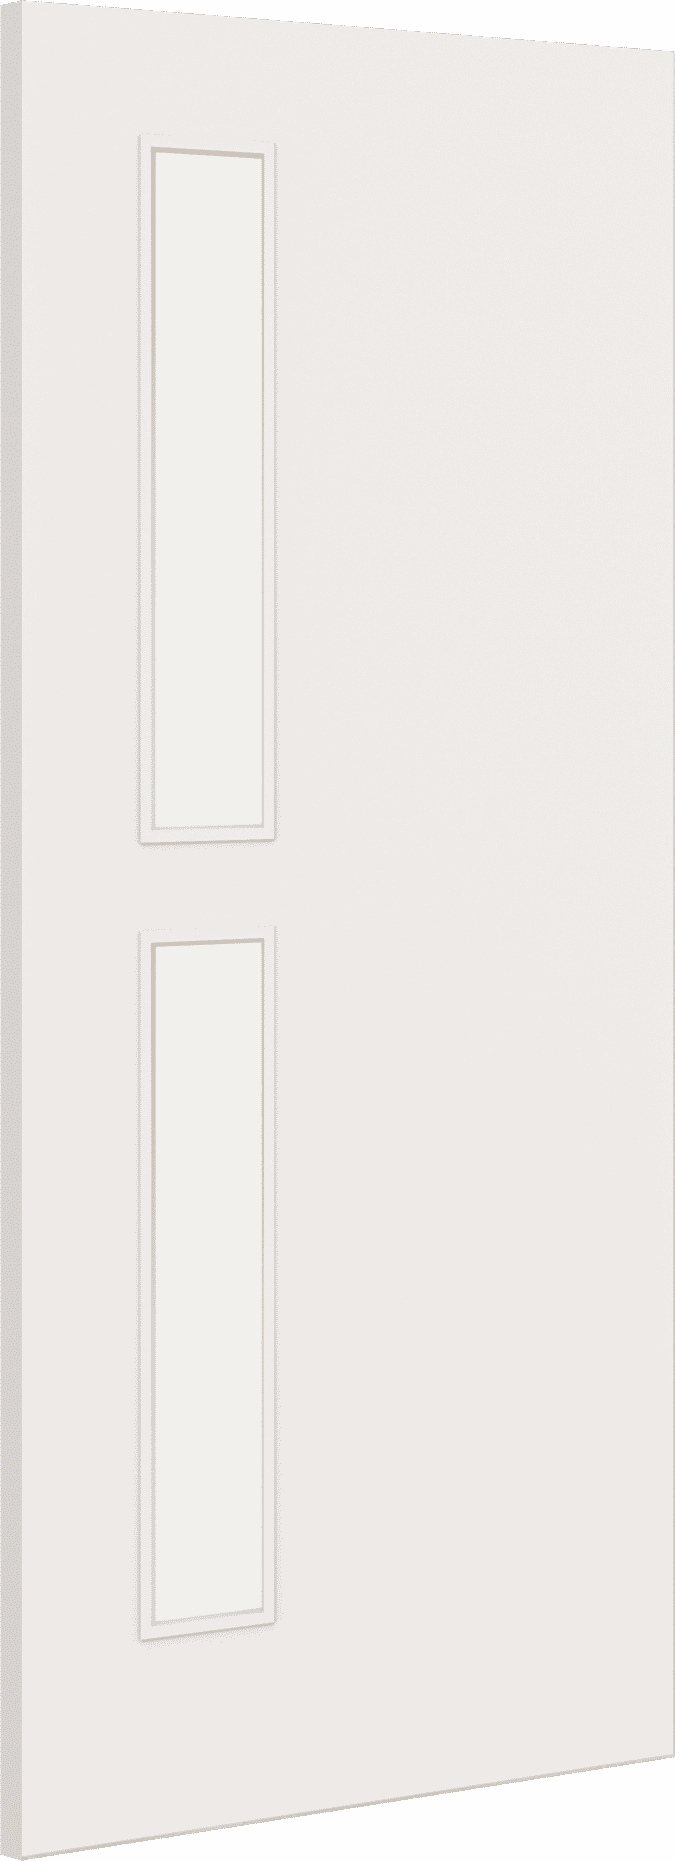 1981mm x 610mm x 44mm (24") Architectural Paint Grade White 07 Frosted Glazed Fire Door Blank